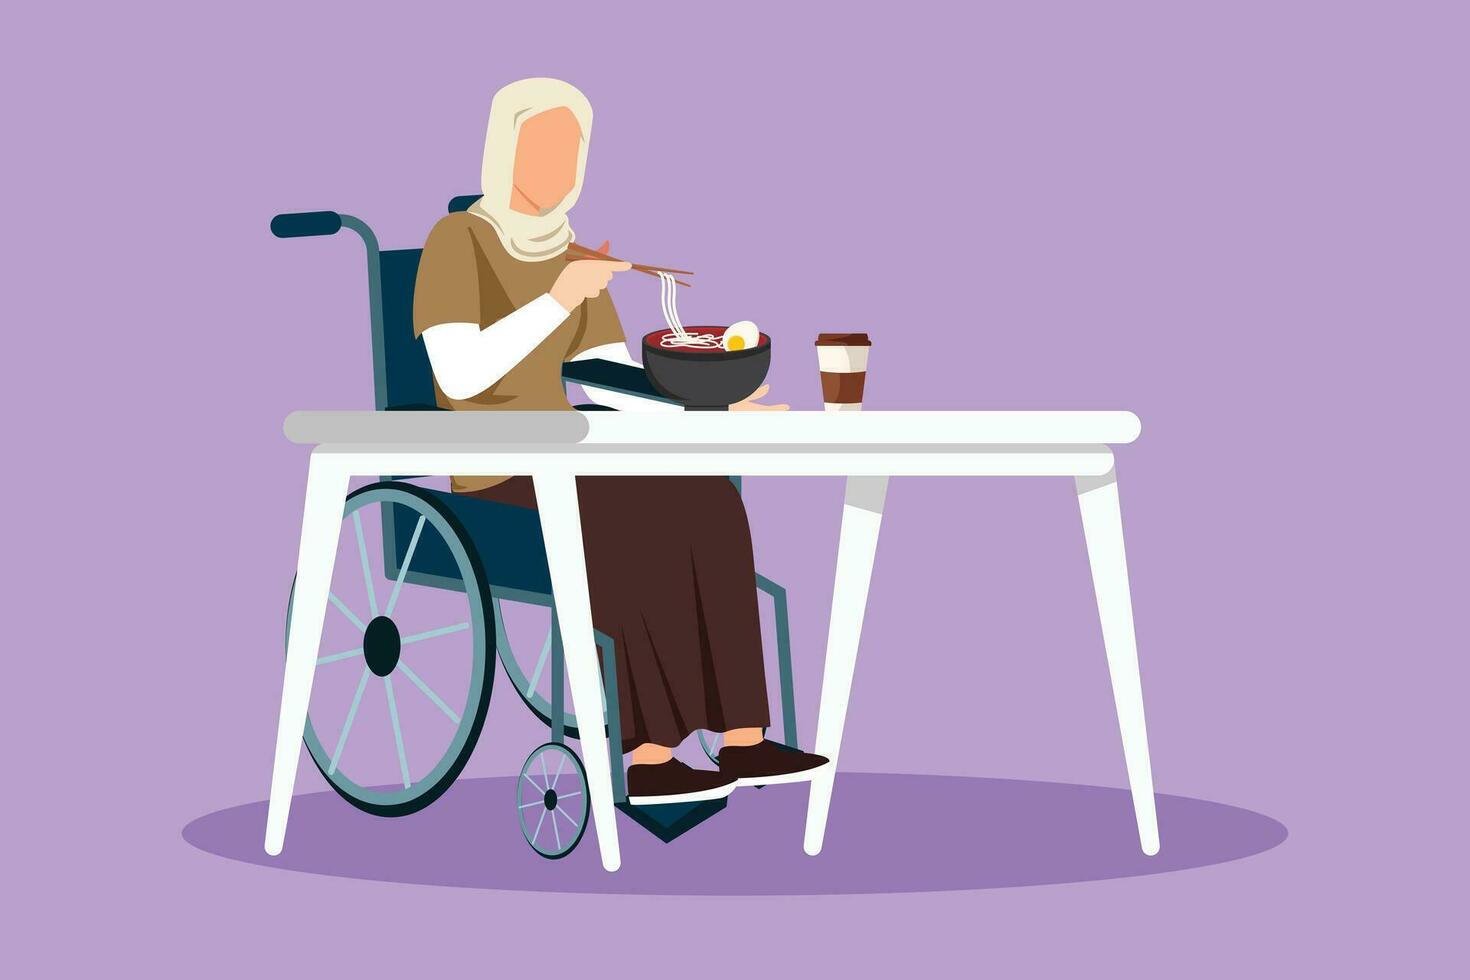 Character flat drawing pretty Arabian female wheelchair user eating ramen or noodles food sitting at table. Having lunch, snack in cafe. Society and disabled people. Cartoon design vector illustration